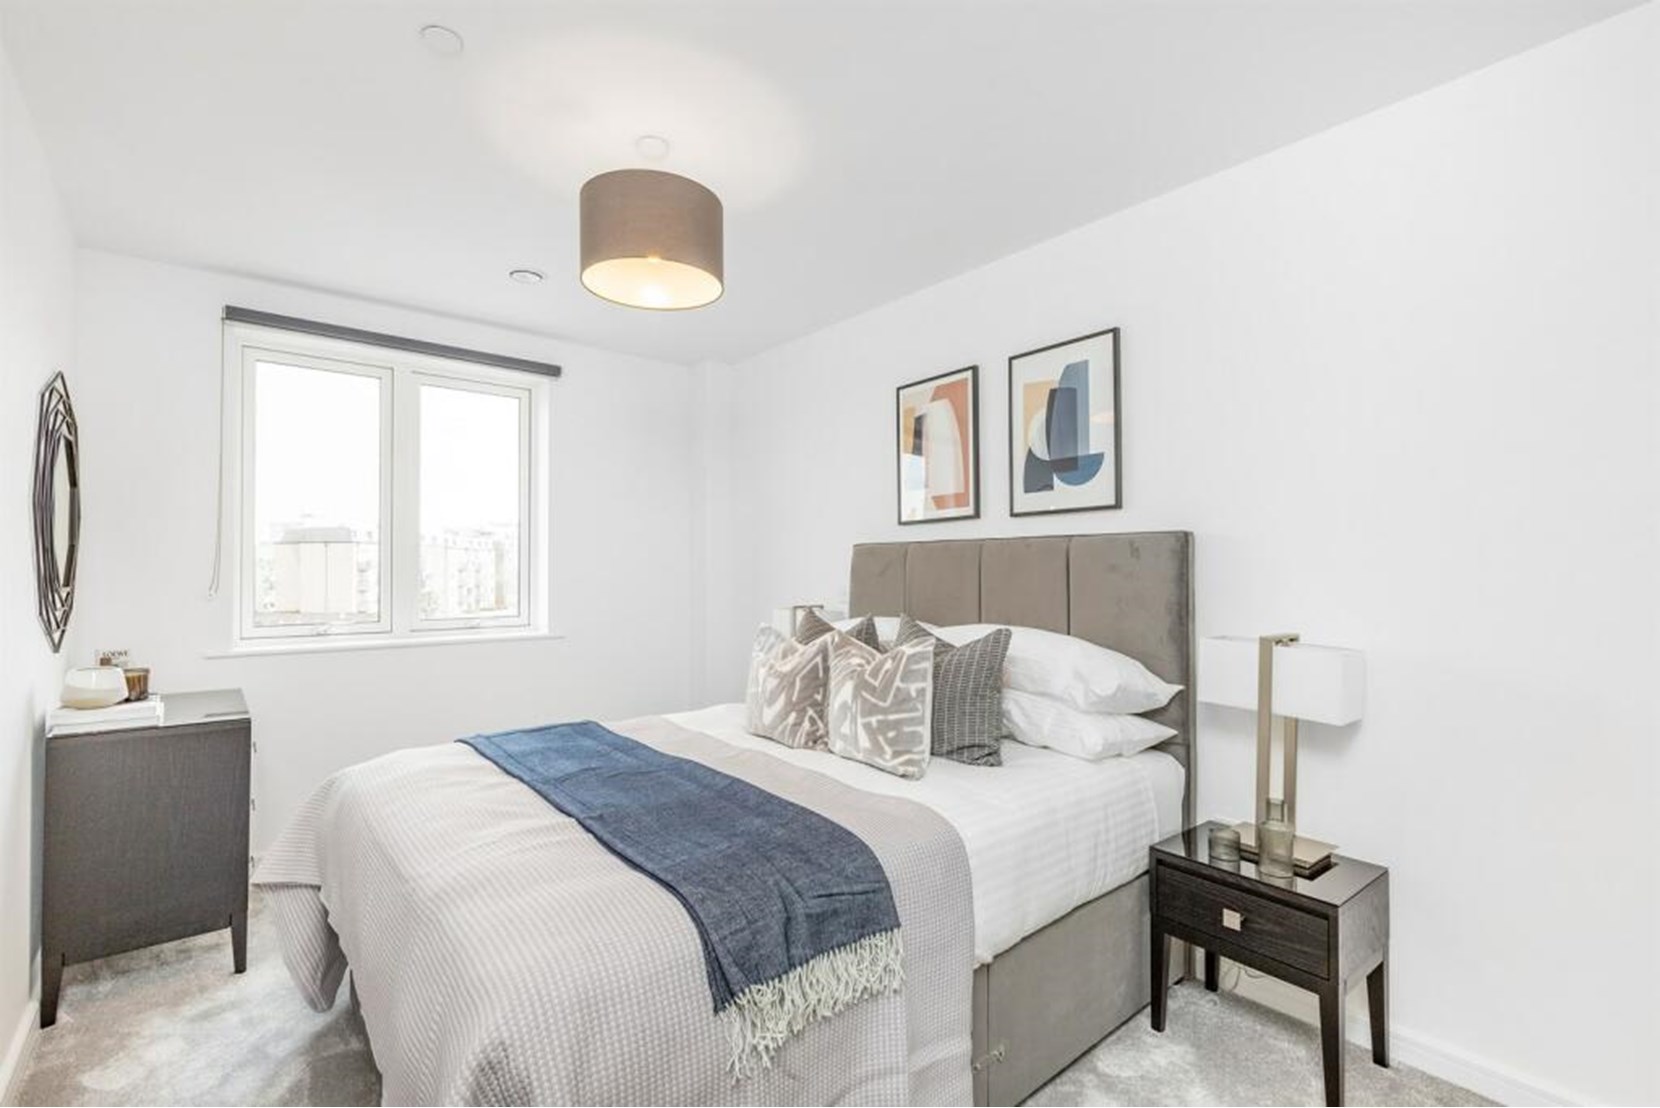 Apartments to Rent by Simple Life London in Ark Soane, Ealing, W3, The Beryl bedroom